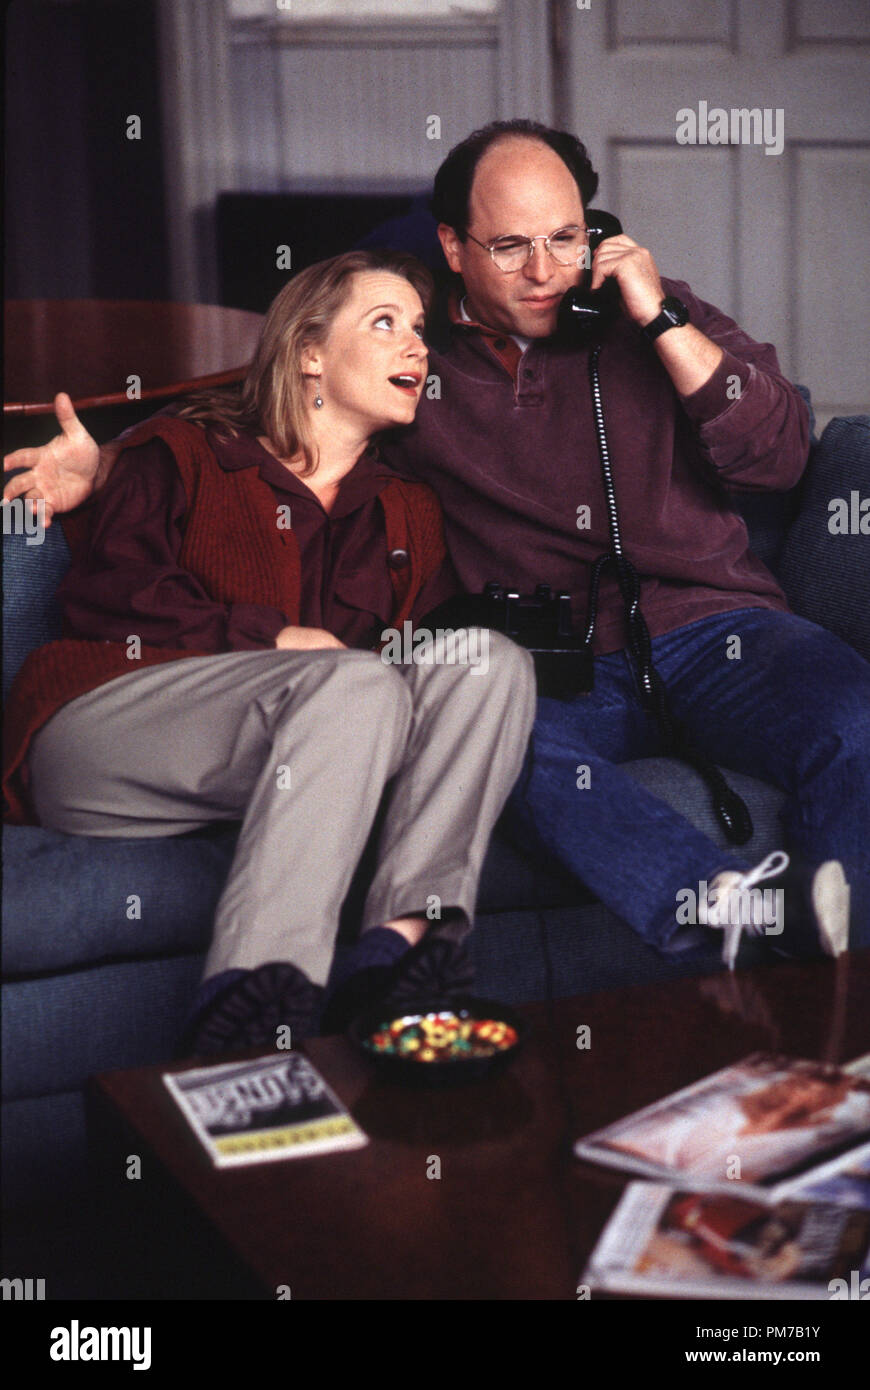 Film Still from 'Seinfeld' Heidi Swedberg, Jason Alexander 1995 Photo Credit: Gary Null   File Reference # 31043126THA  For Editorial Use Only - All Rights Reserved Stock Photo